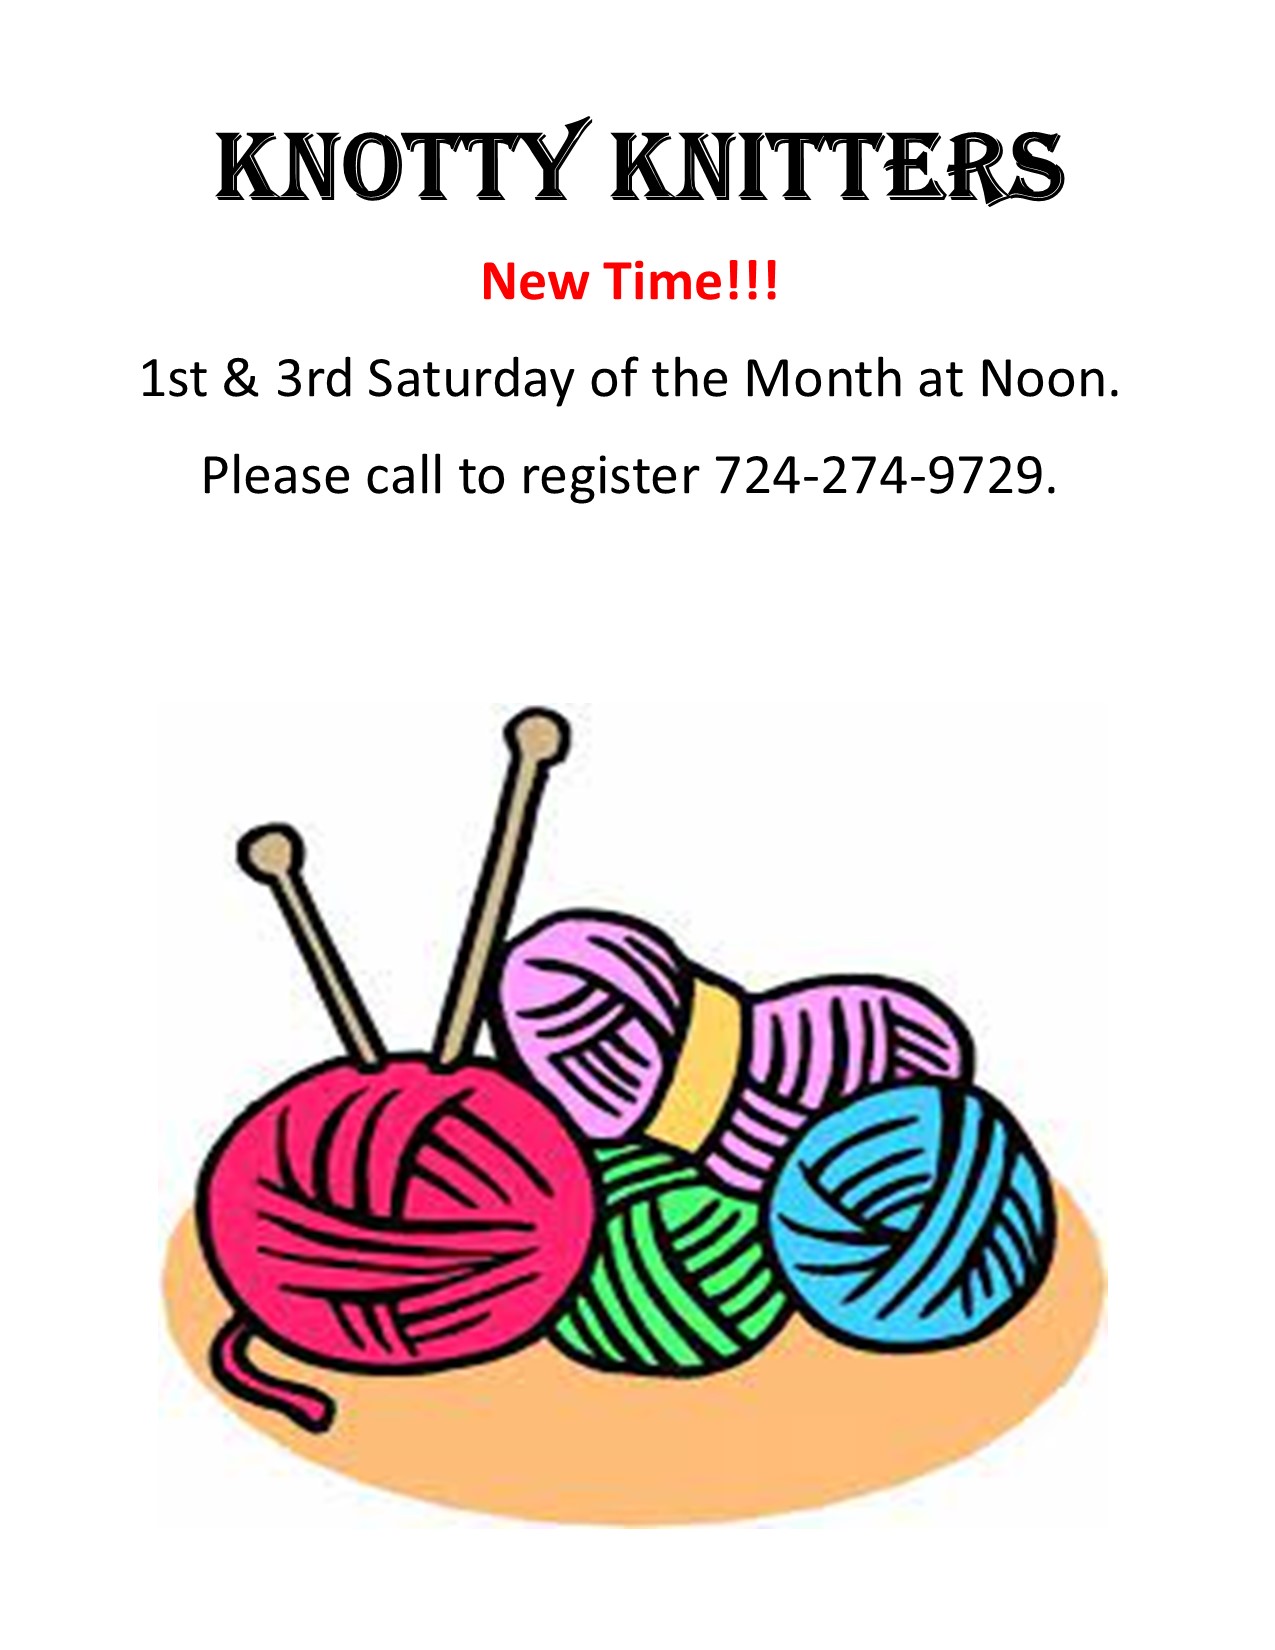 Knotty Knitters - New Time